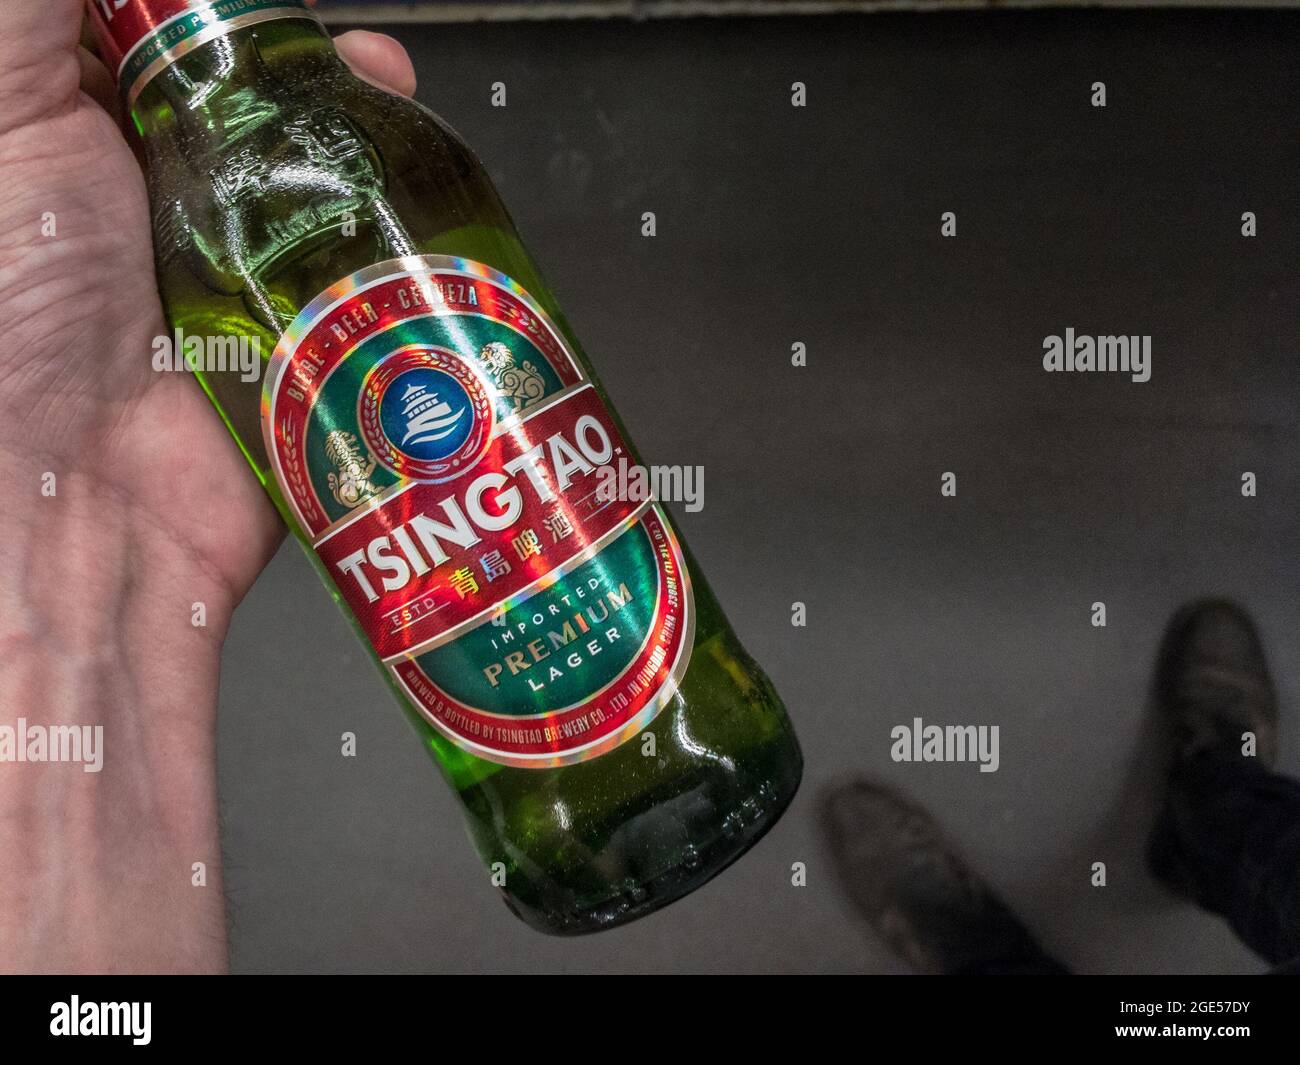 Picture of a hand holding a bottle of Tsingtao beer. Tsingtao Brewery Co. Ltd. is China's second largest brewery, with about 15% of domestic market sh Stock Photo